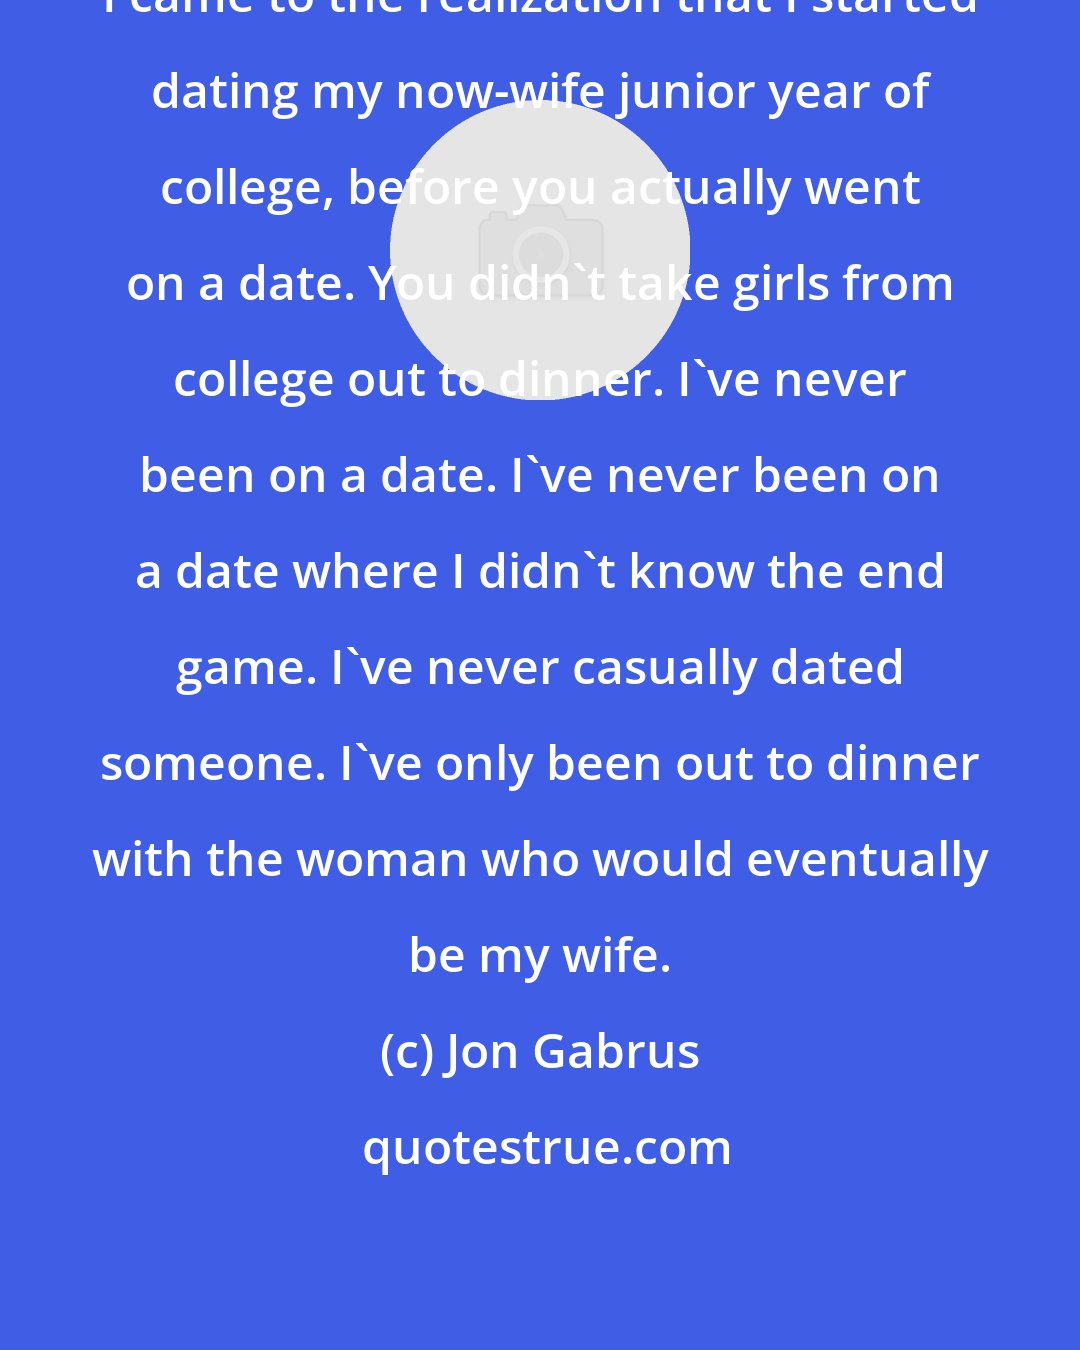 Jon Gabrus: I came to the realization that I started dating my now-wife junior year of college, before you actually went on a date. You didn't take girls from college out to dinner. I've never been on a date. I've never been on a date where I didn't know the end game. I've never casually dated someone. I've only been out to dinner with the woman who would eventually be my wife.